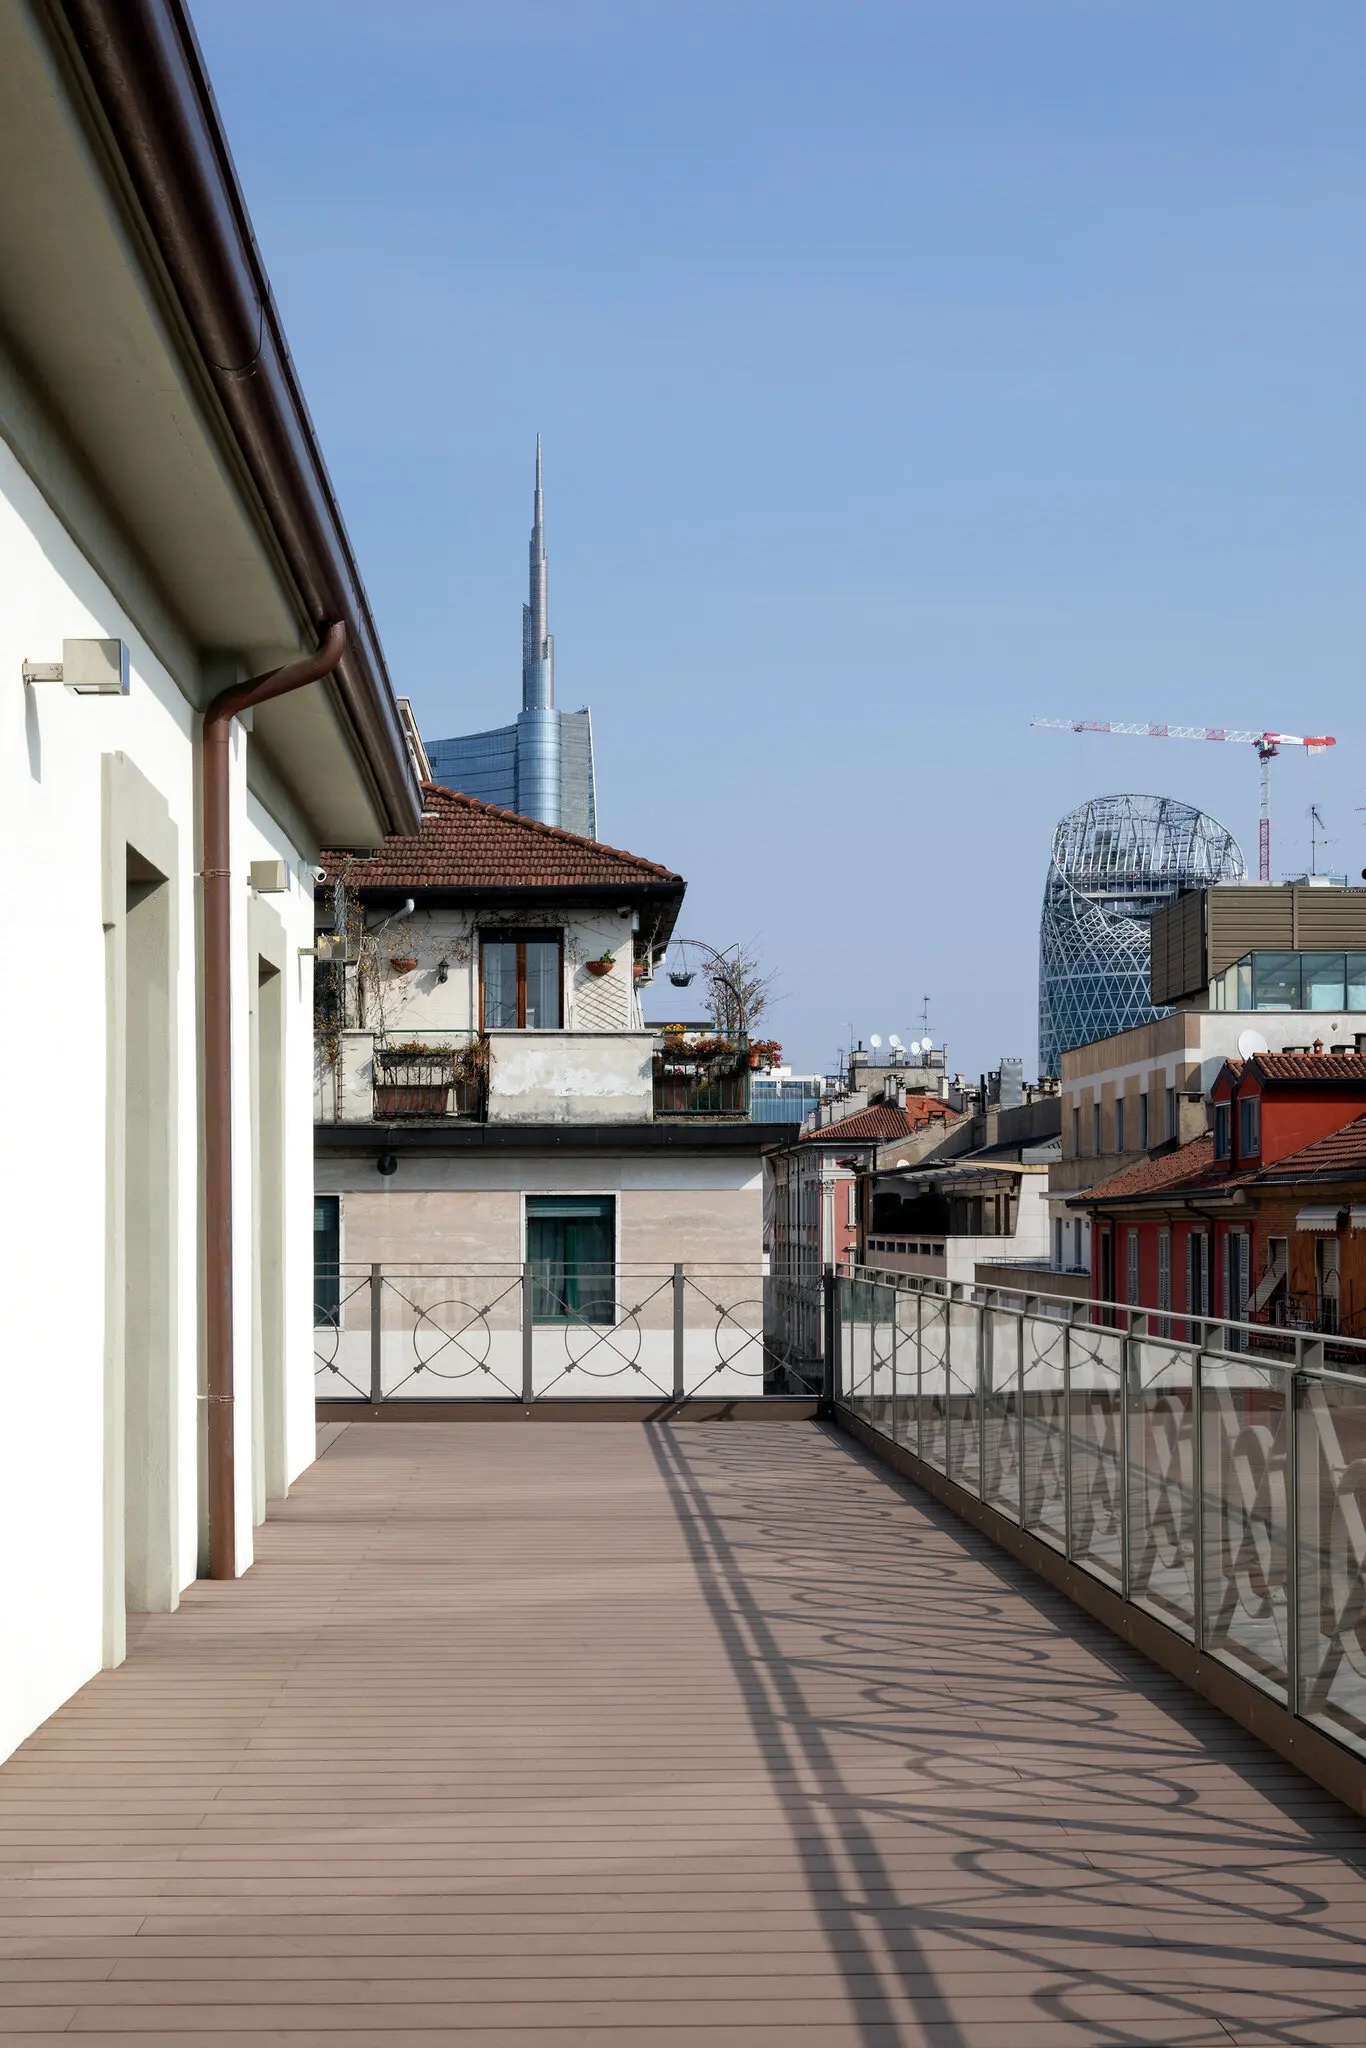 The wraparound terrace on the building’s top floor overlooks the terracotta-tiled rooftops of Milan’s Brera neighbourhood. Just beyond are the glass and steel skyscrapers of the Porta Nuova district. Photography by Allegra Martin.